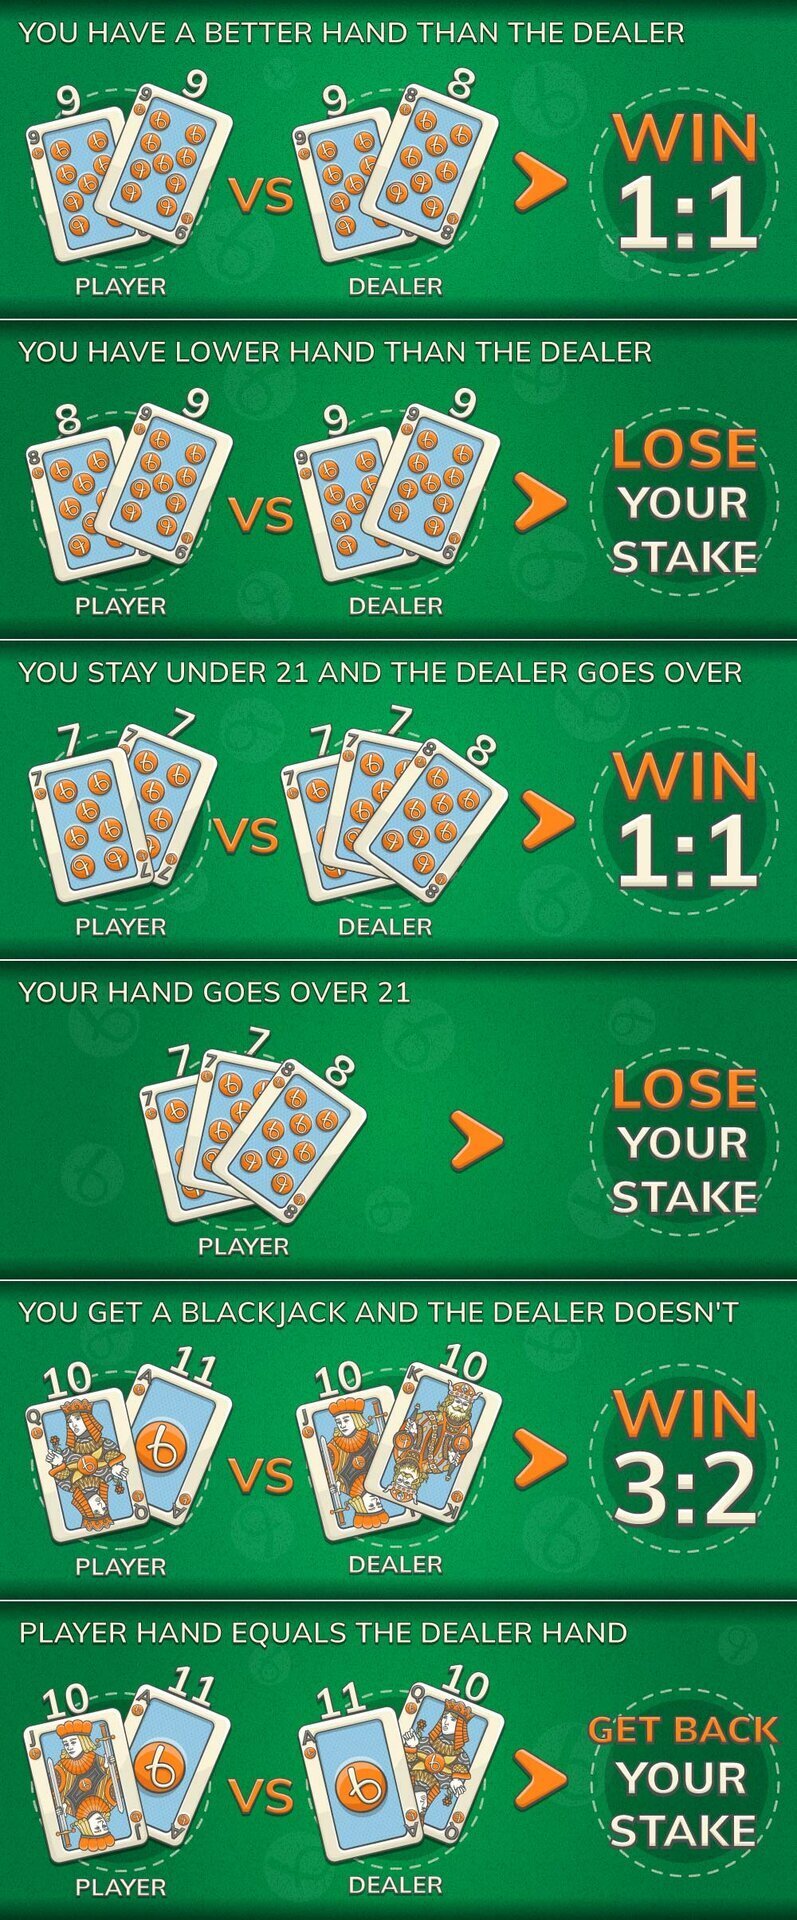 Rules of blackjack payouts